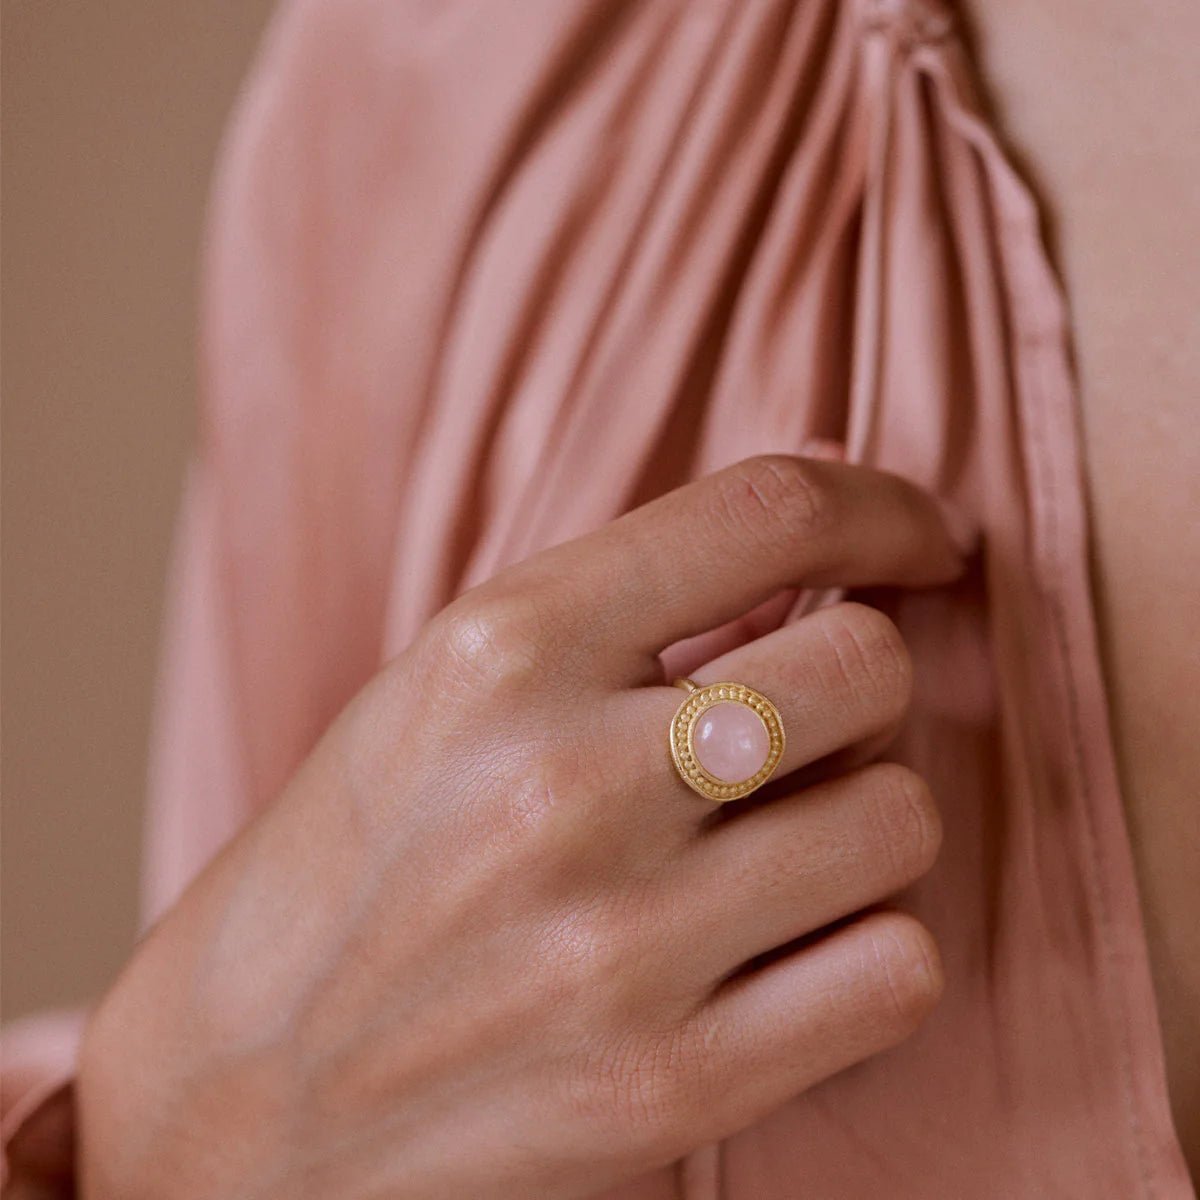 Anaïs Pink Ring by Agapé (2 year warranty) - Styled by Ashley Brooke